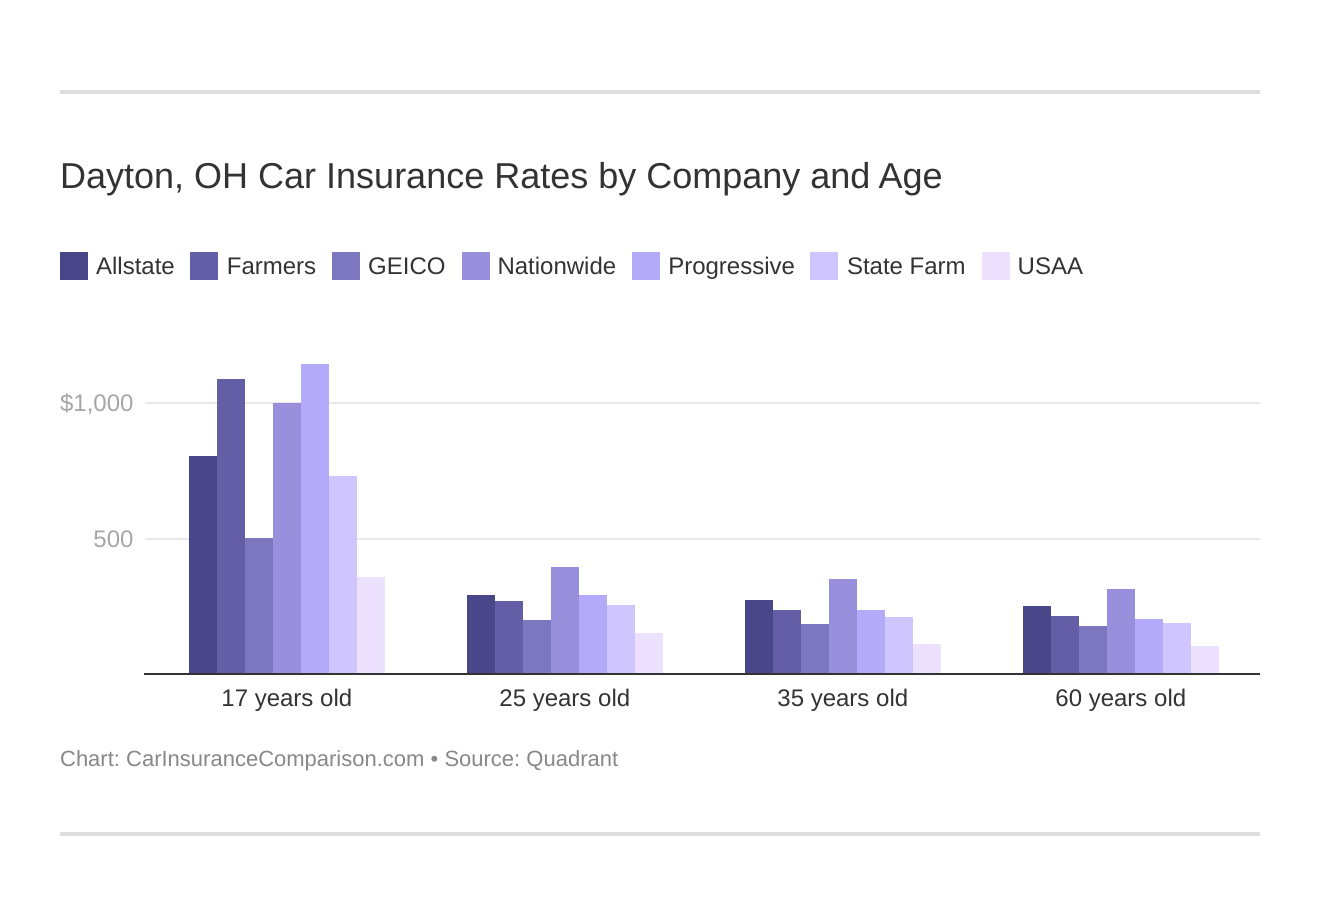 Dayton, OH Car Insurance Rates by Company and Age